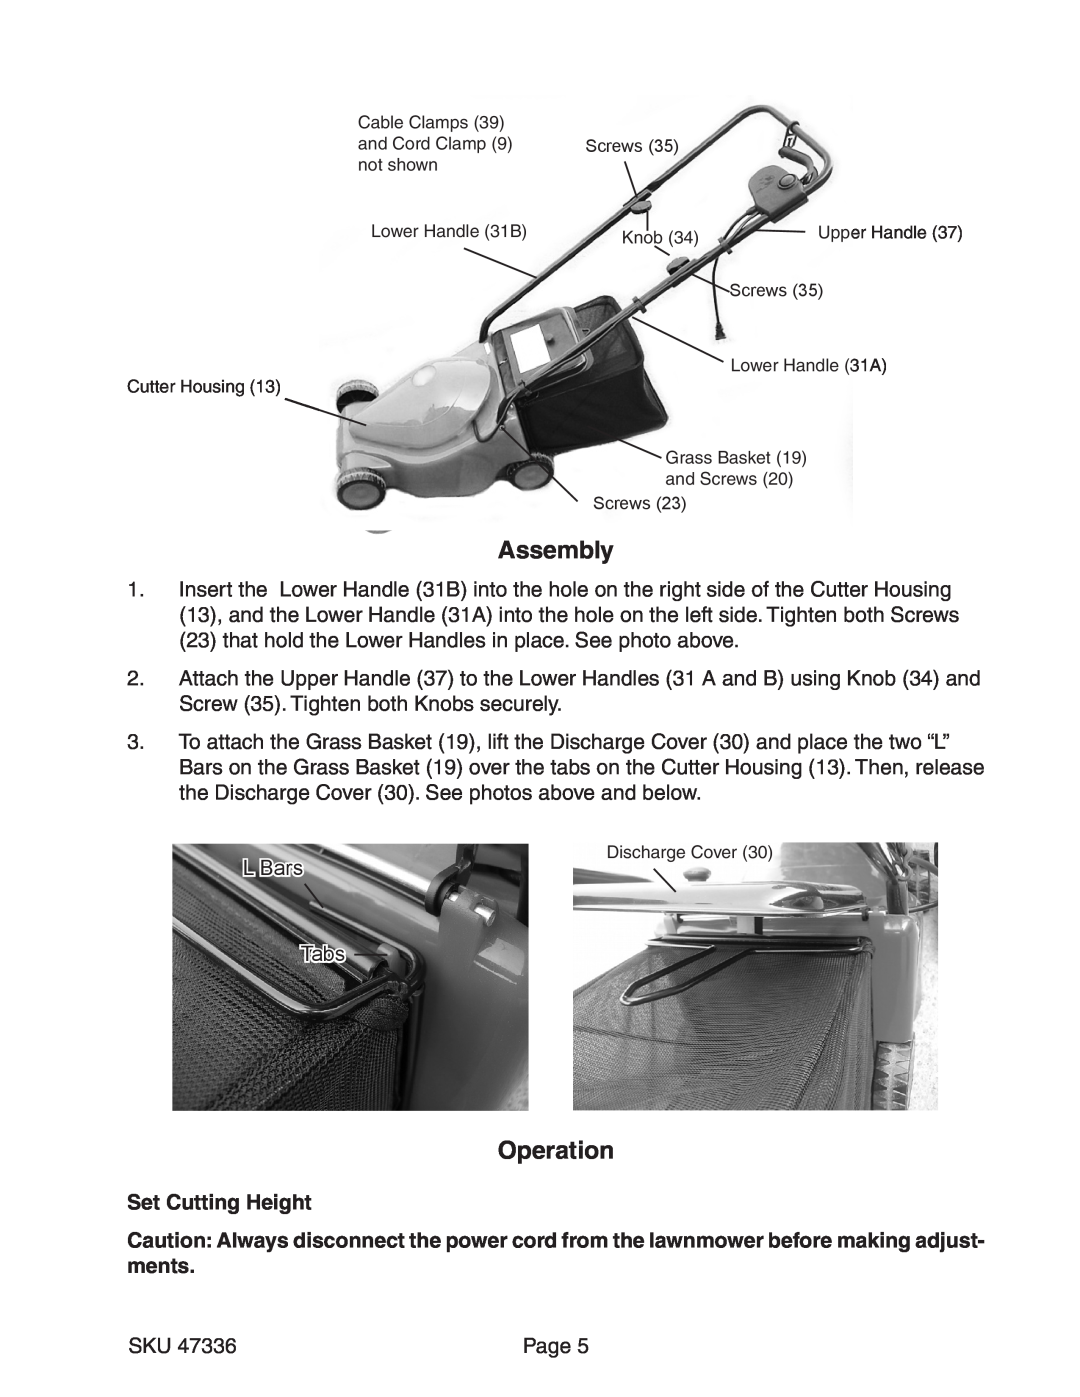 Harbor Freight Tools 47336 manual Assembly, Operation, Set Cutting Height 